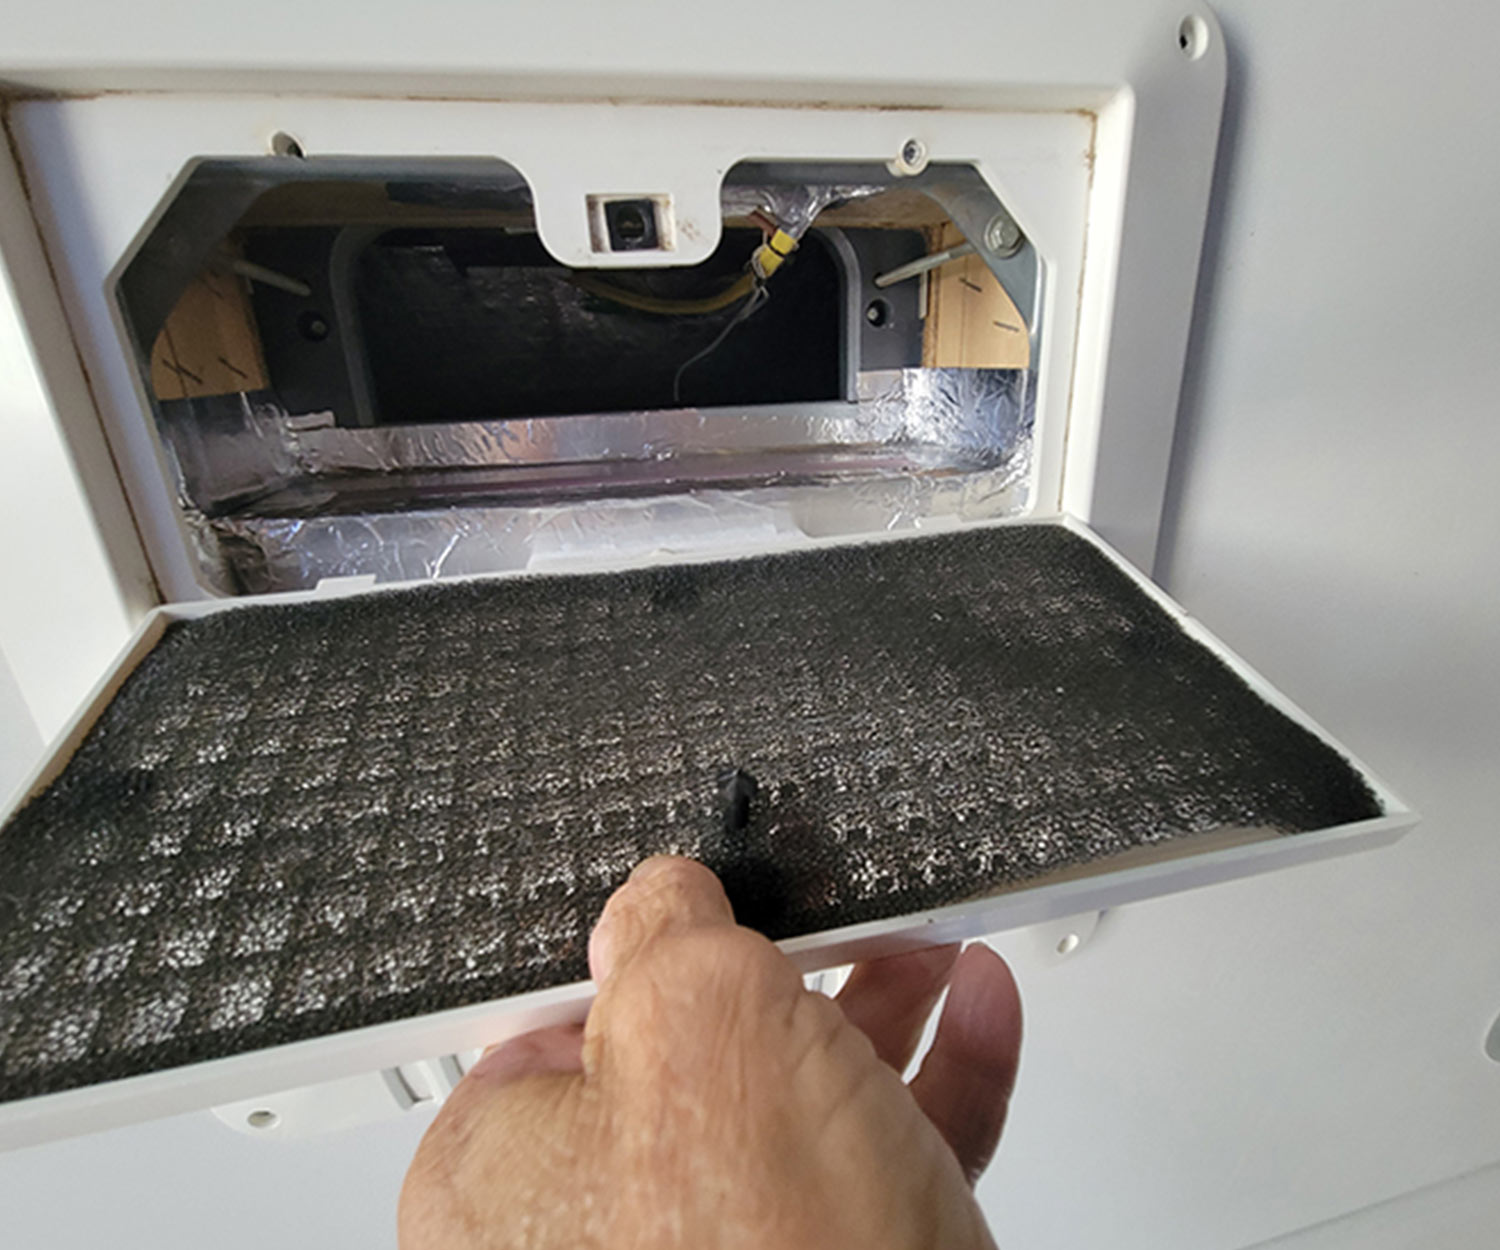 the hold-down panel is removed with the return-air filter attached